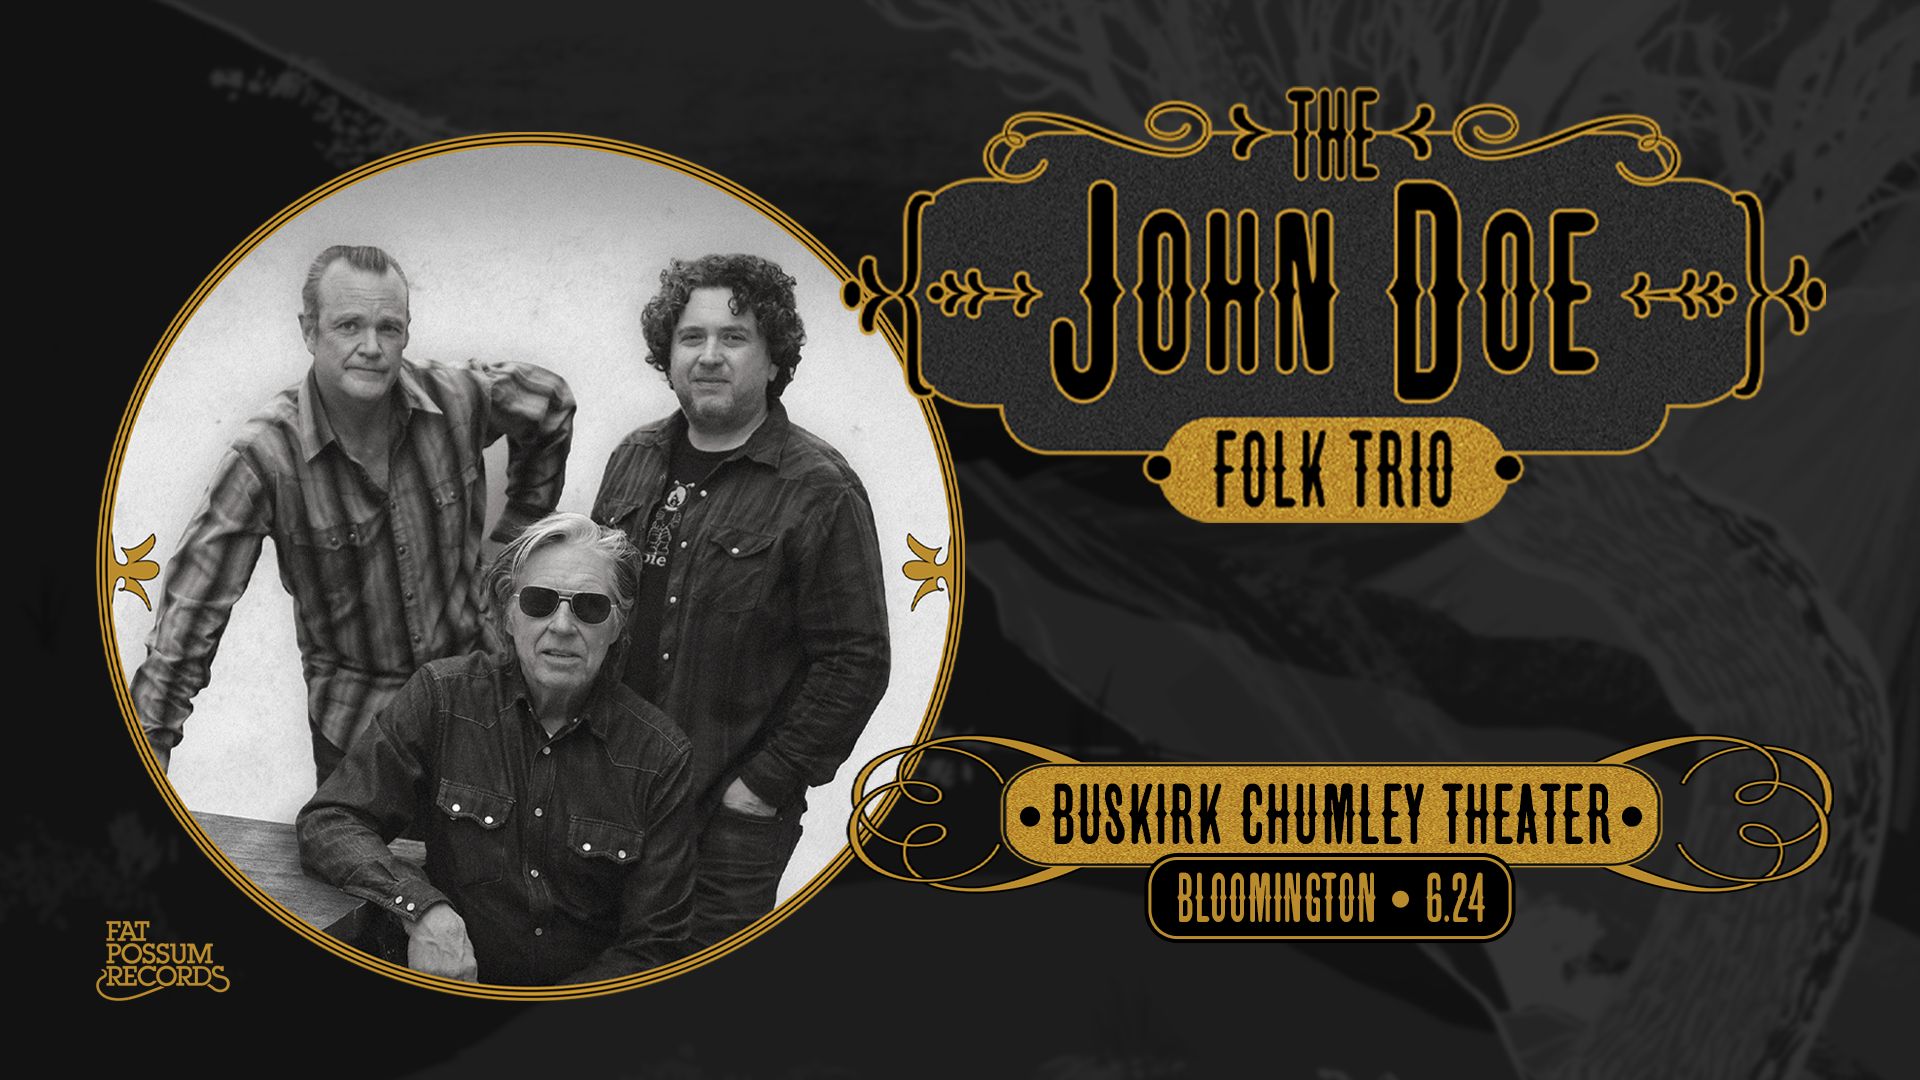 "X" frontman John Doe and his folk trio are coming to Bloomington, IN on June 24, Bloomington, Indiana, United States